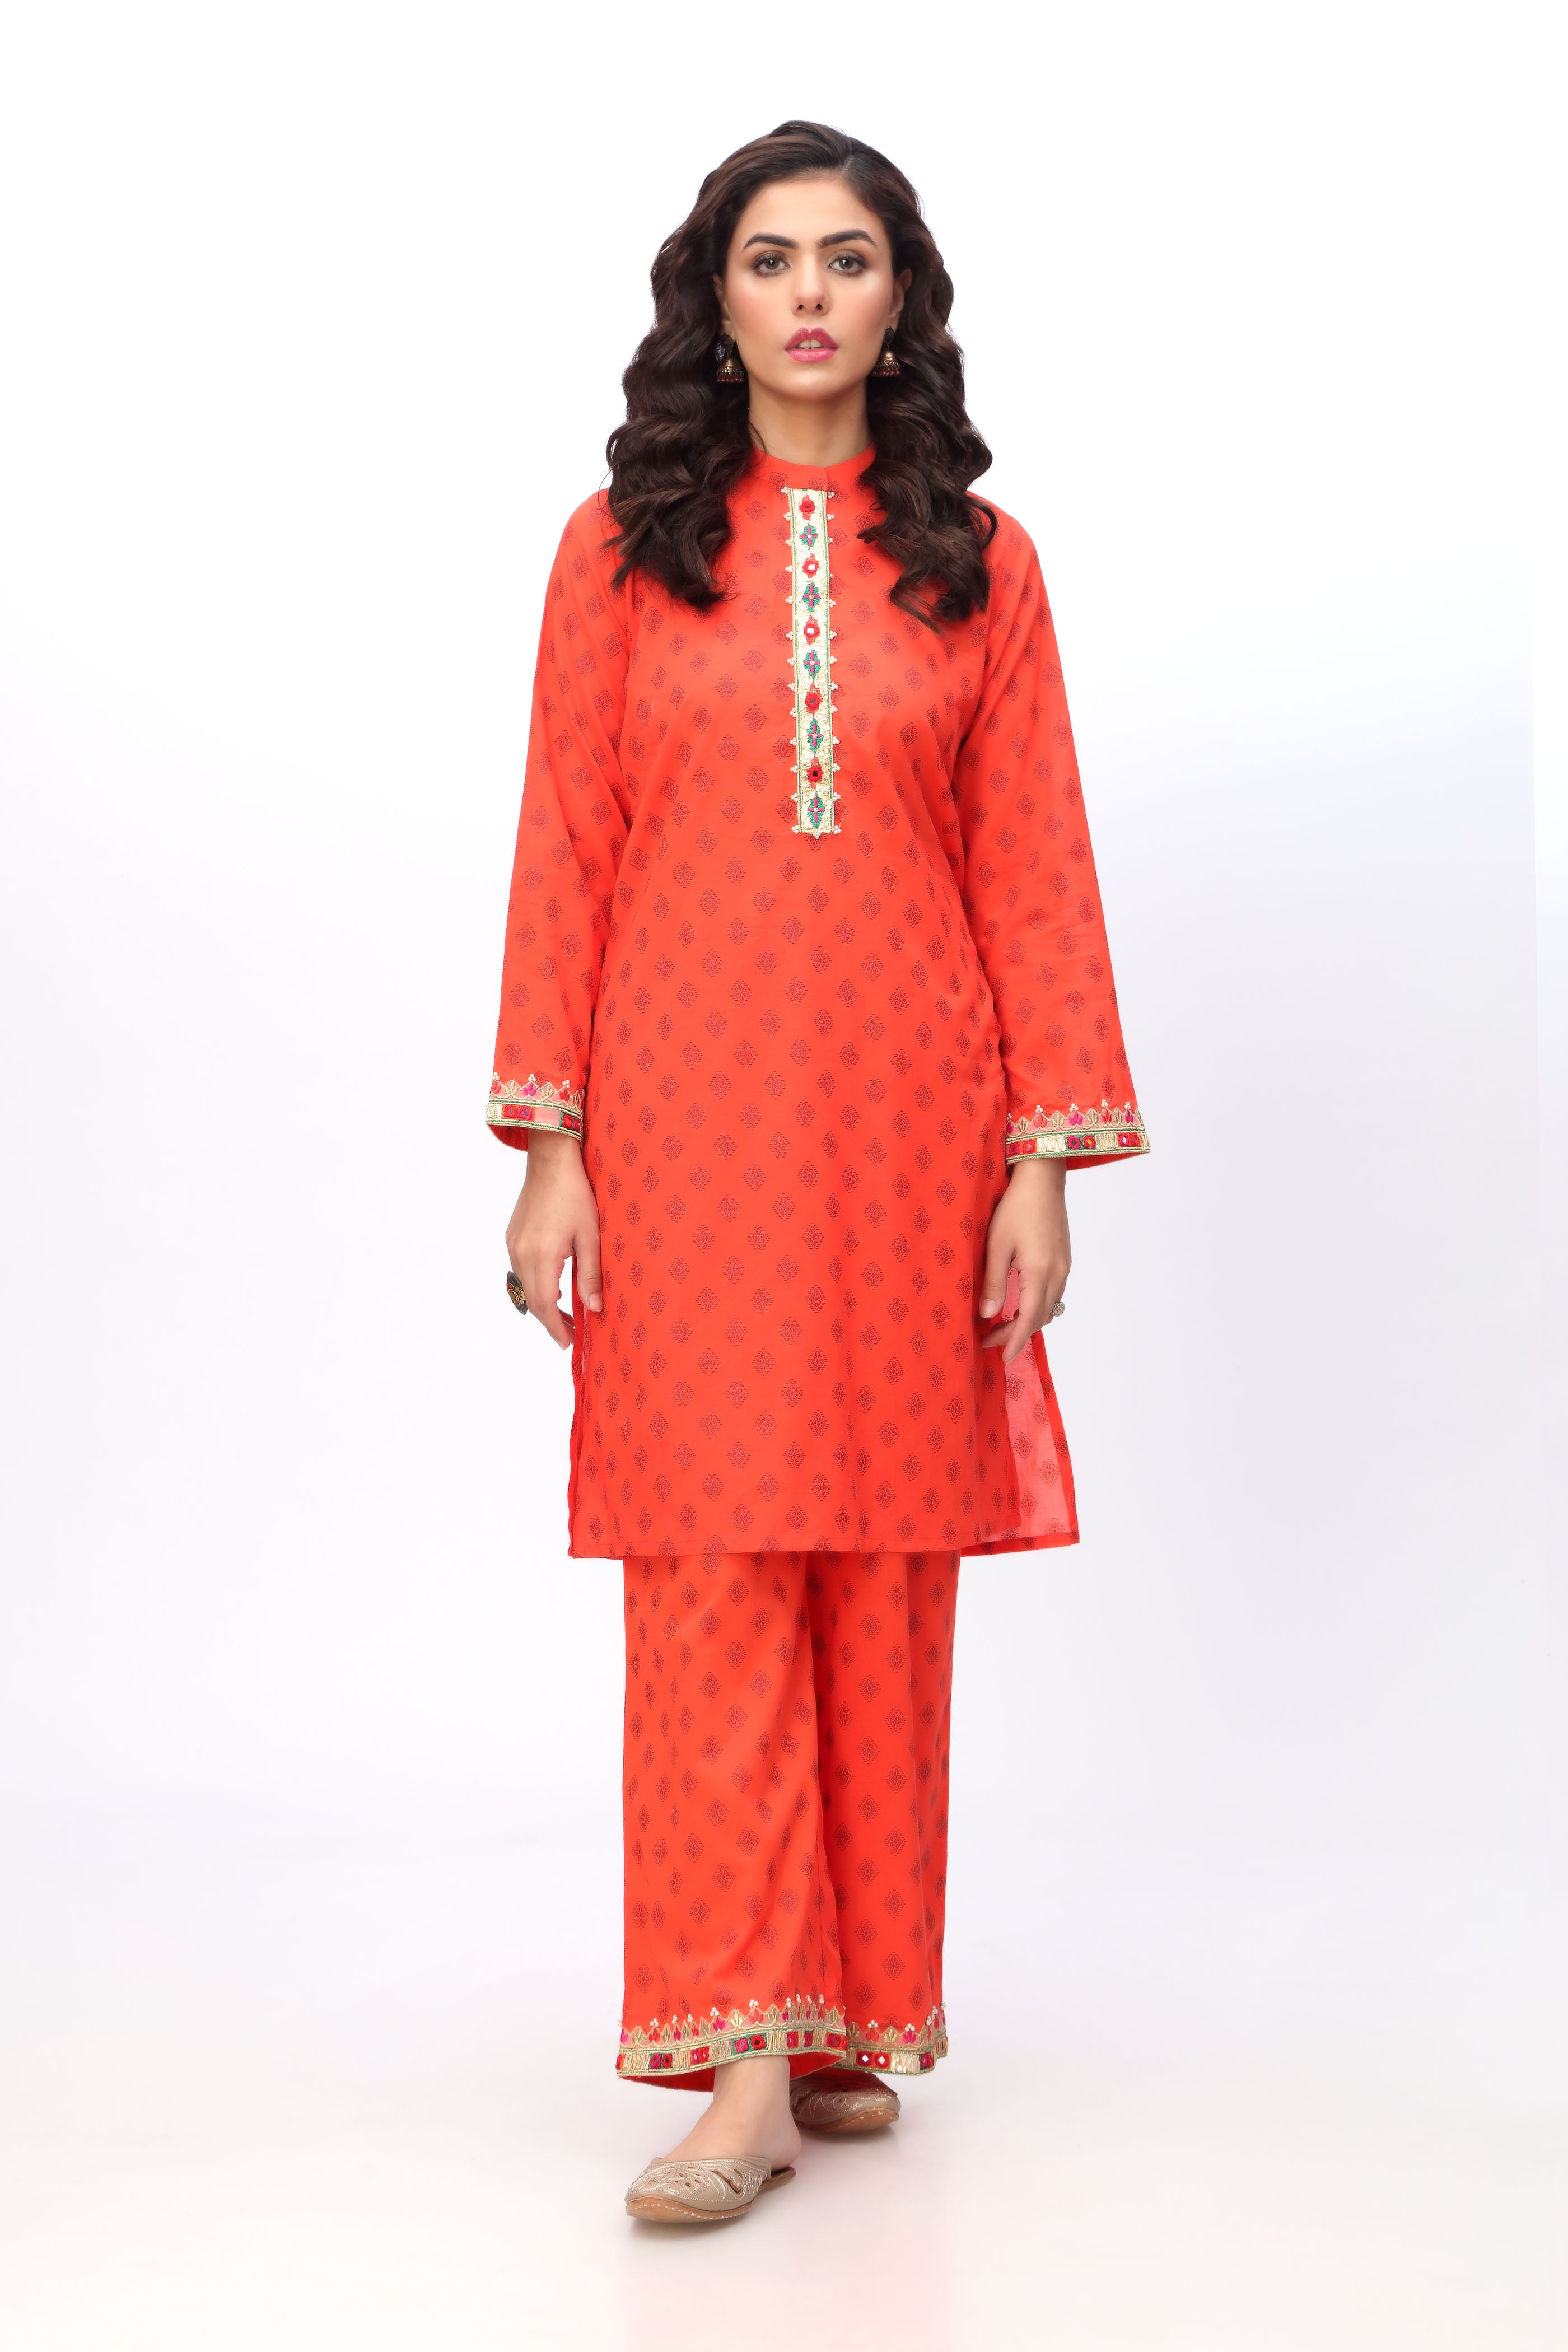 Panni Placket in Orange coloured Printed Lawn fabric